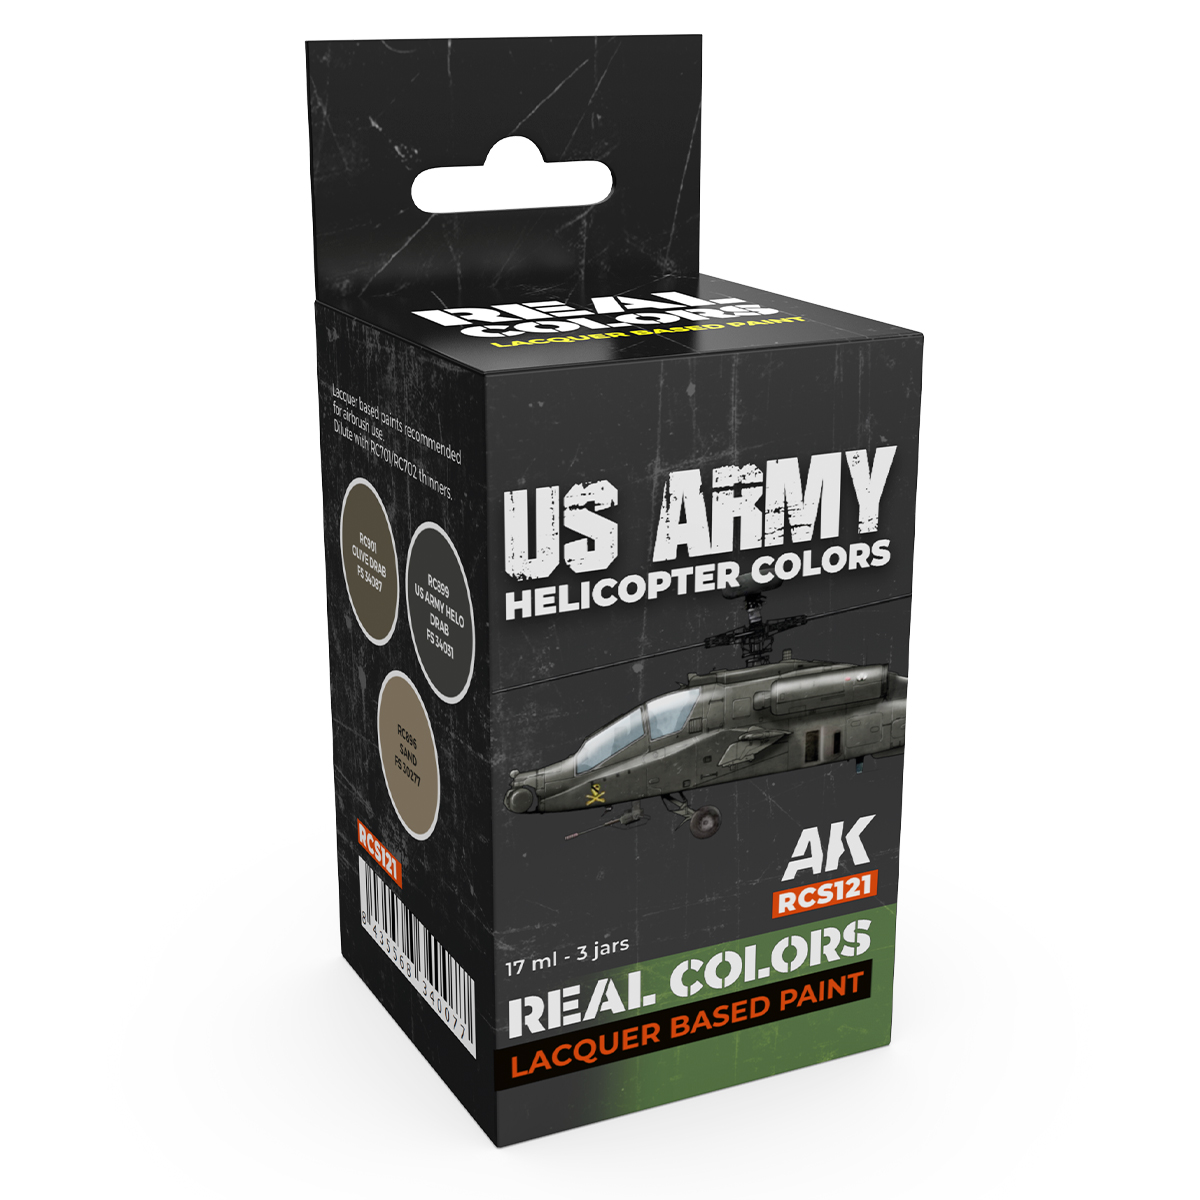 US Army Helicopter Colors